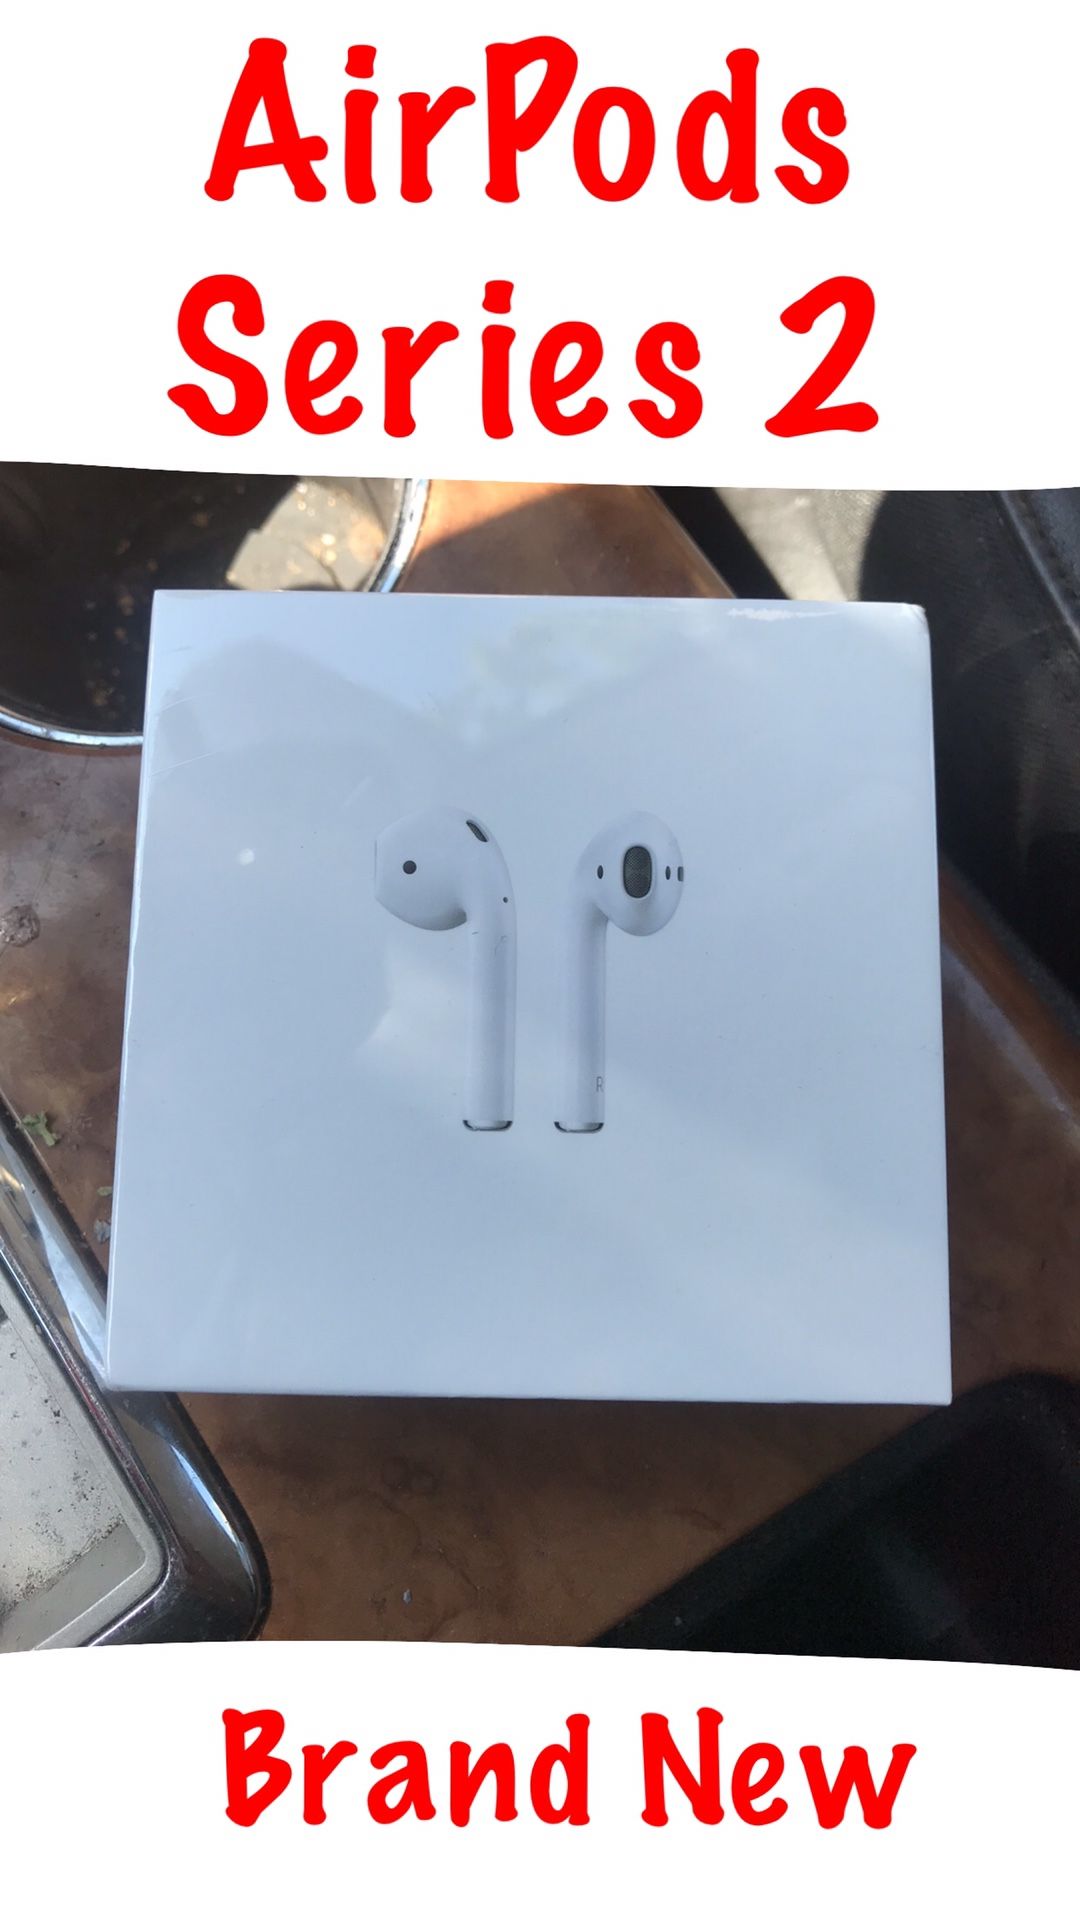 Apple AirPods series 2 brand new